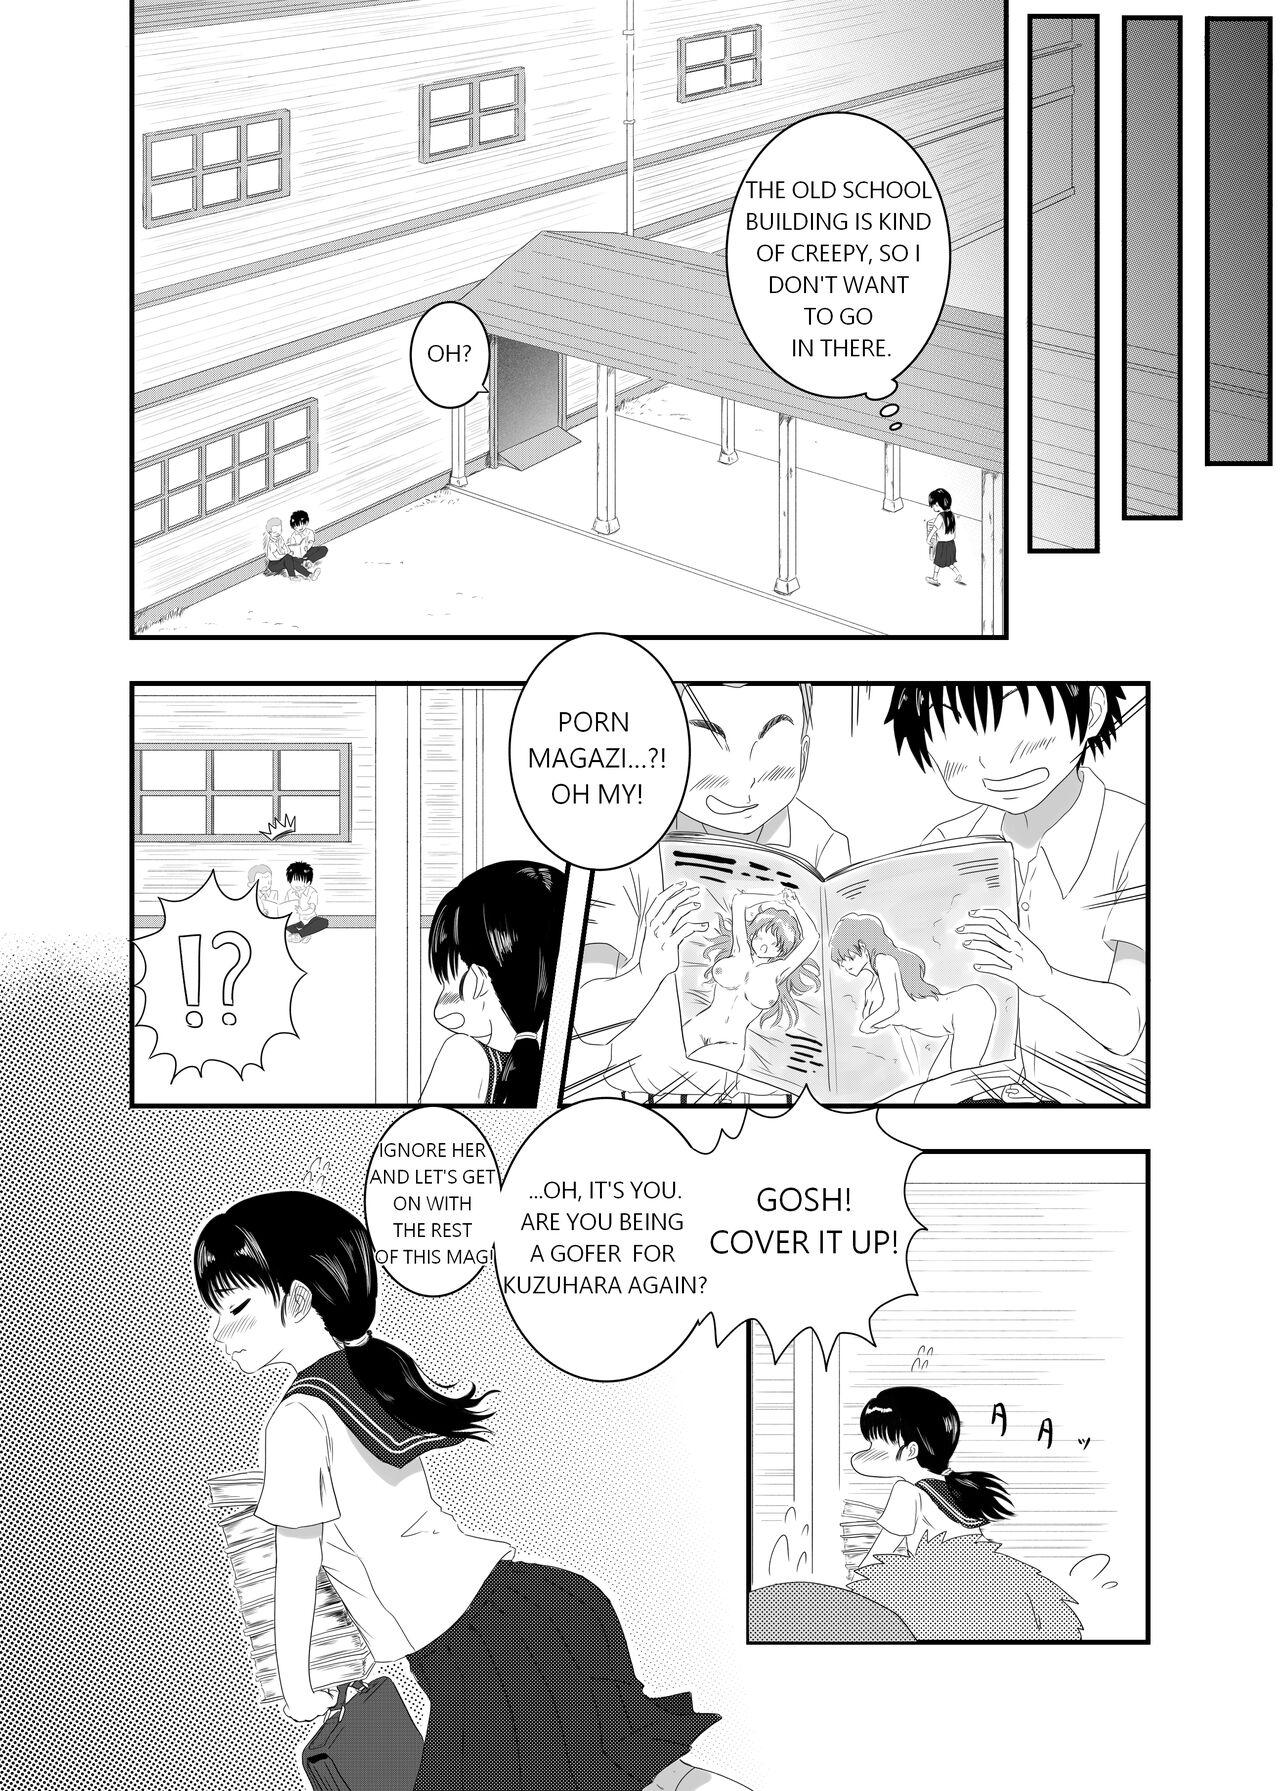 1080p The Evil Mask 1 - The mask 4some - Page 4